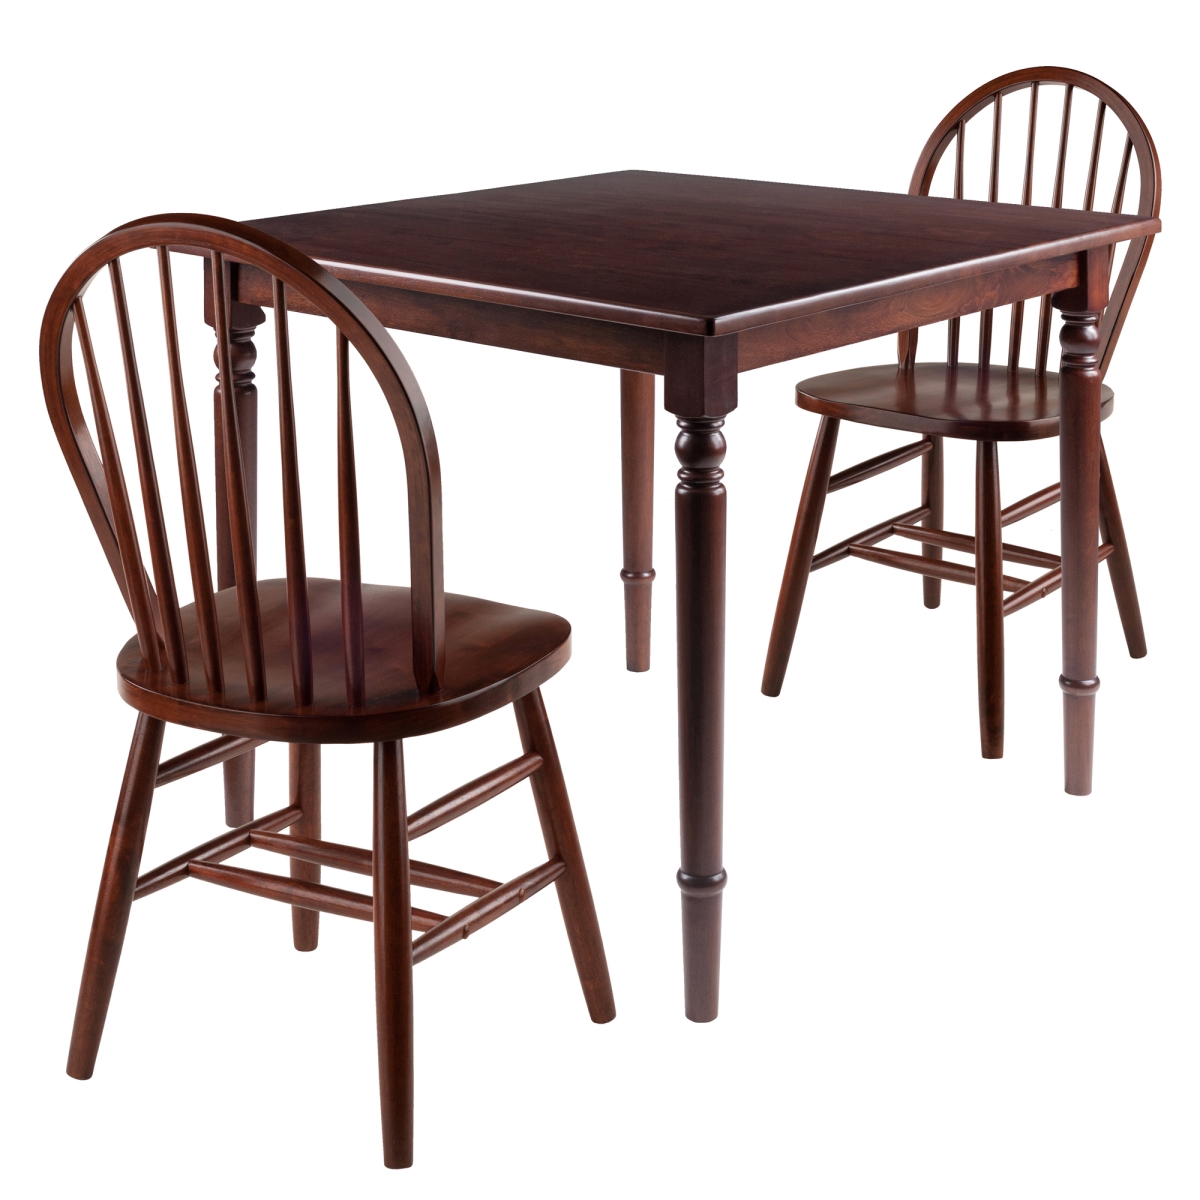 94396 Mornay Dining Table With Windsor Chairs Set - 3 Piece